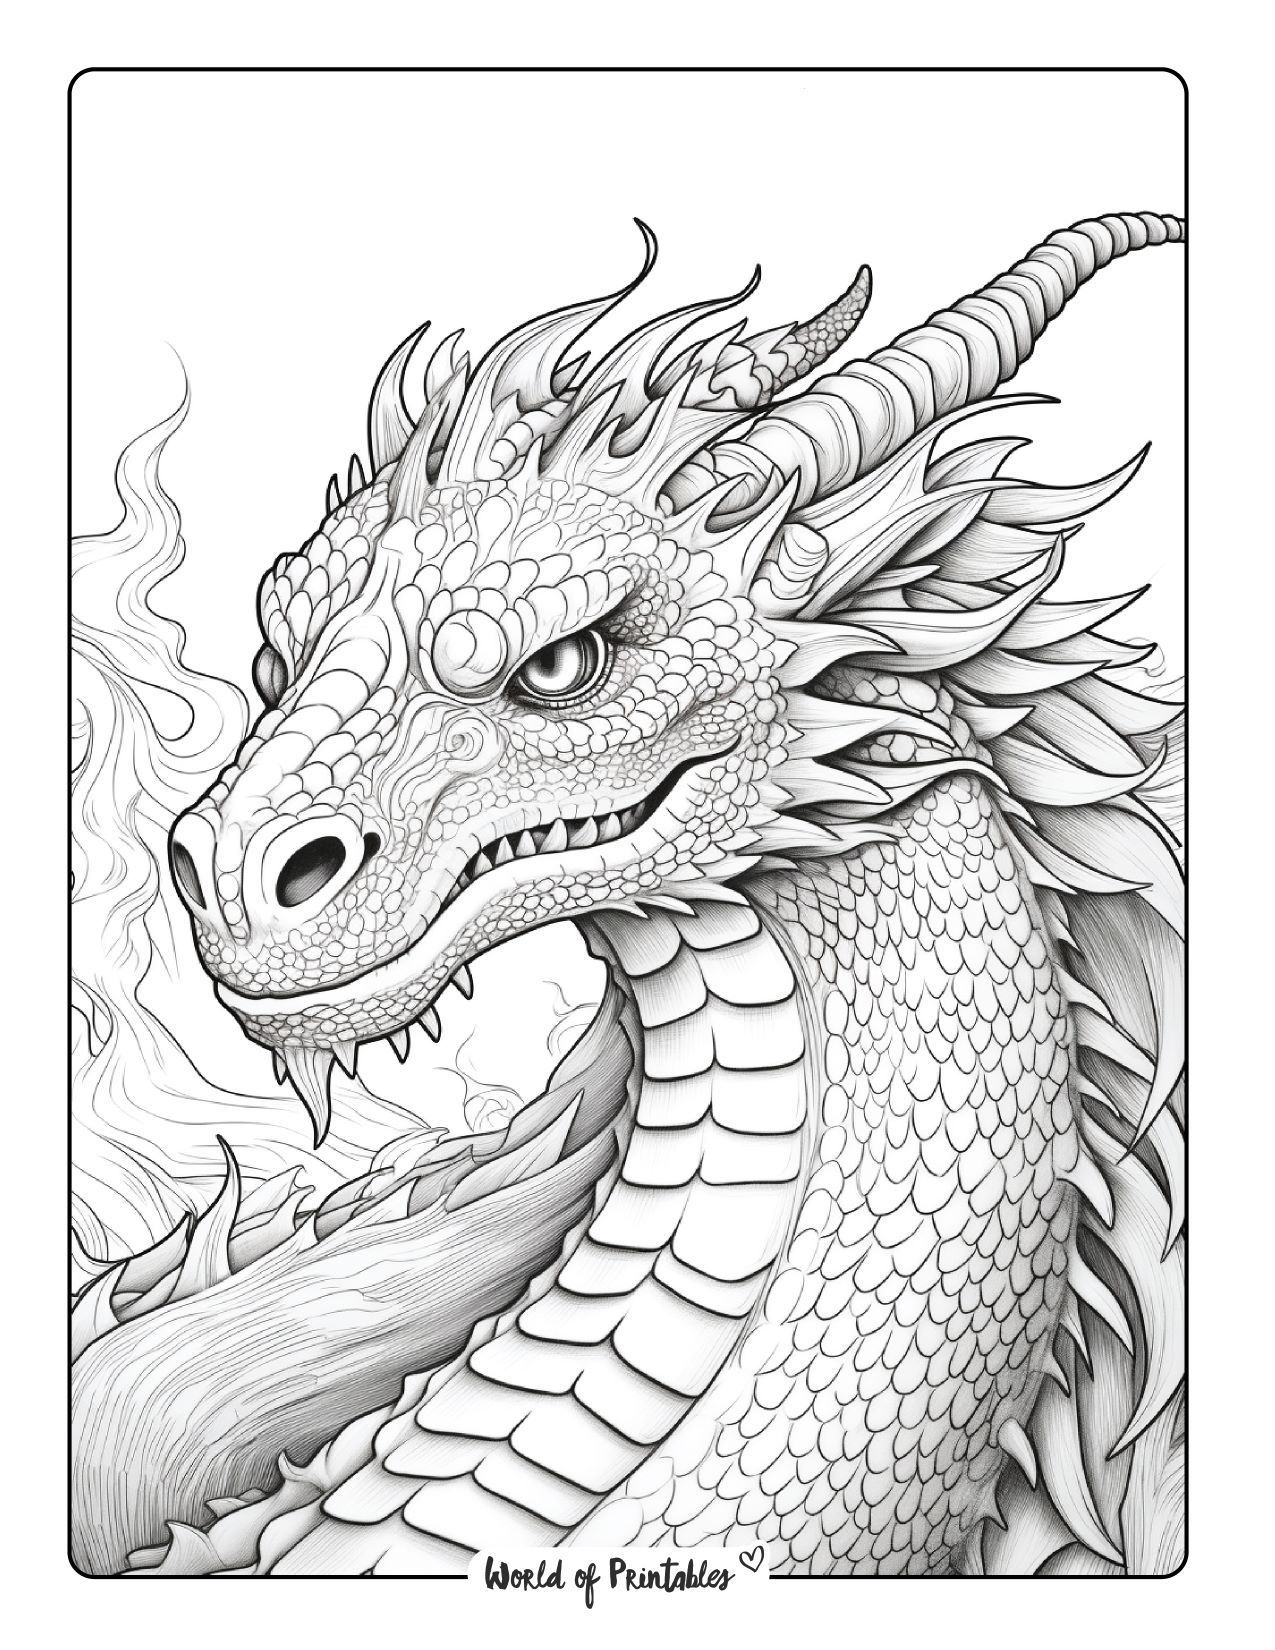 Dragon coloring pages for adults dragon coloring page cool coloring pages dragon pictures